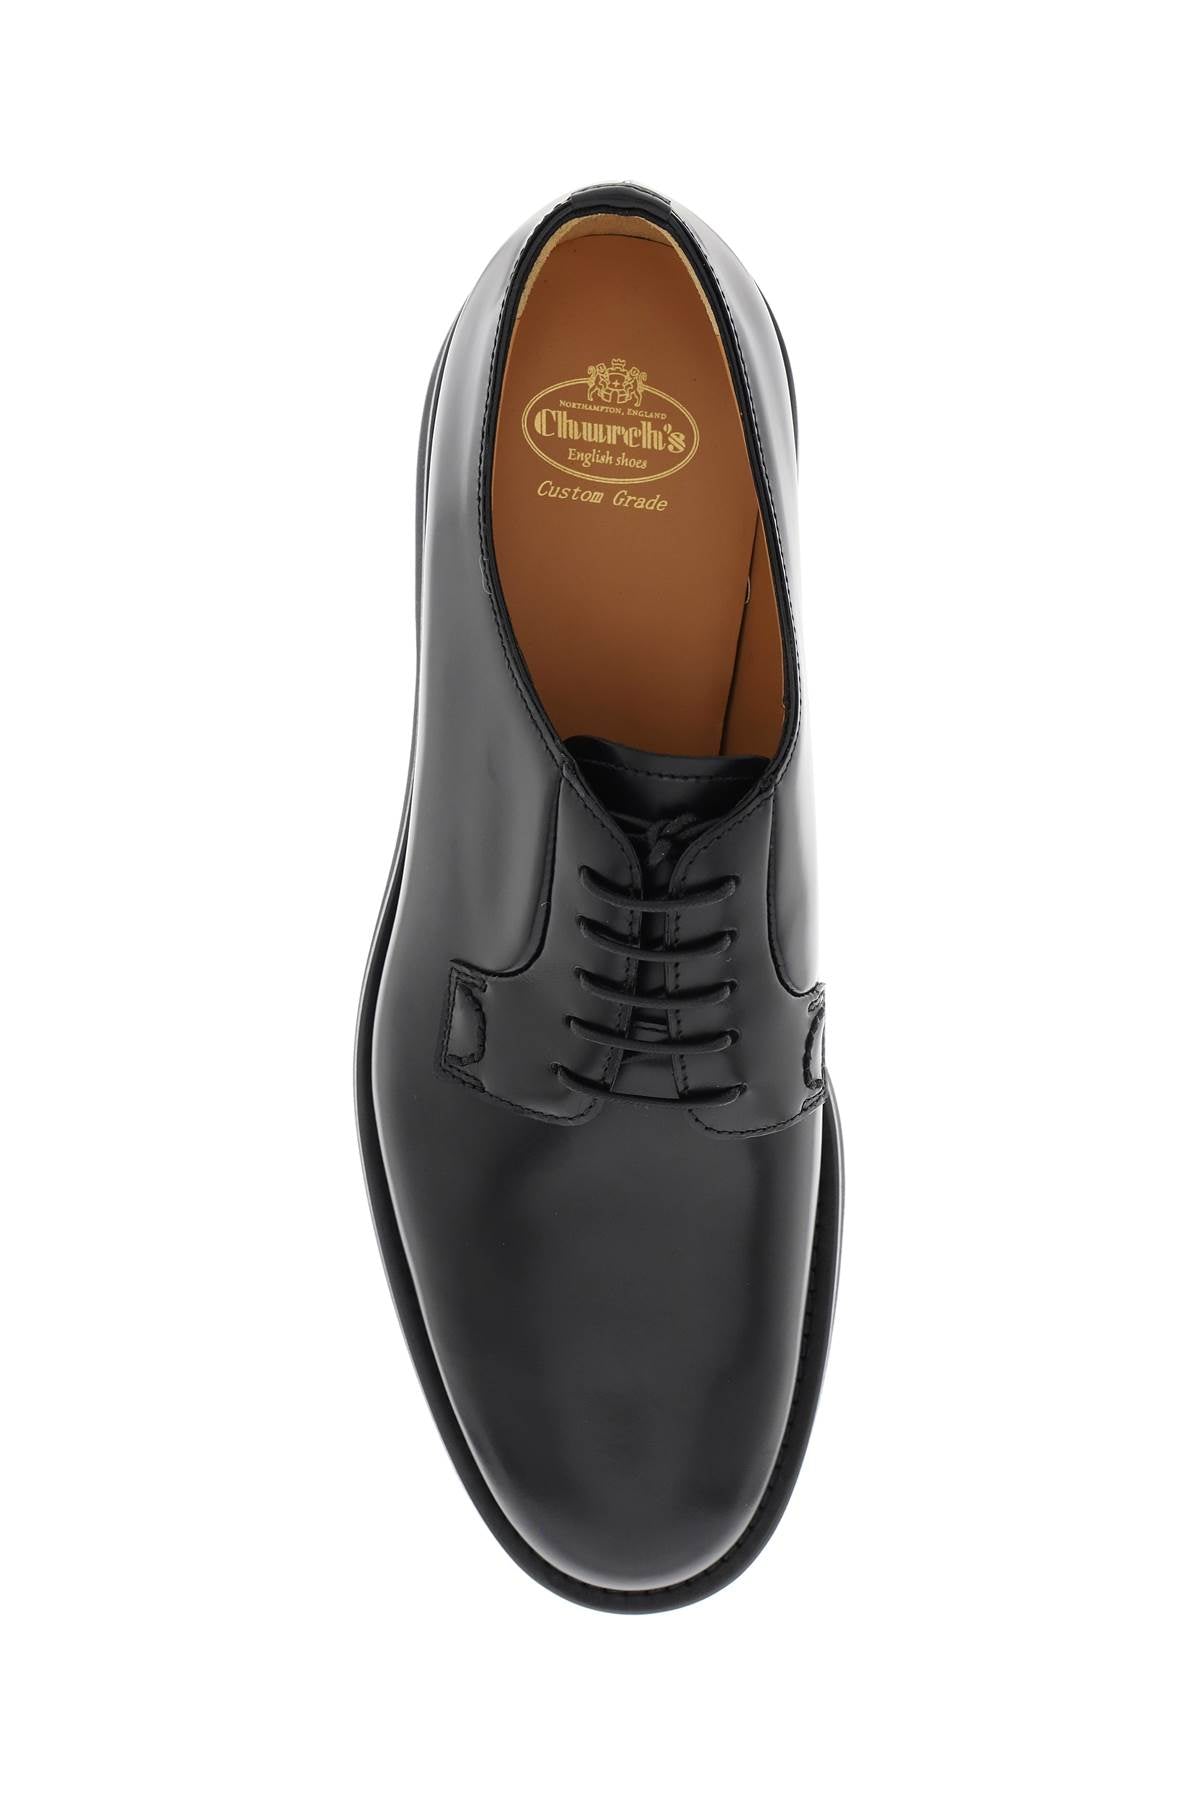 Church's leather shannon derby shoes-1